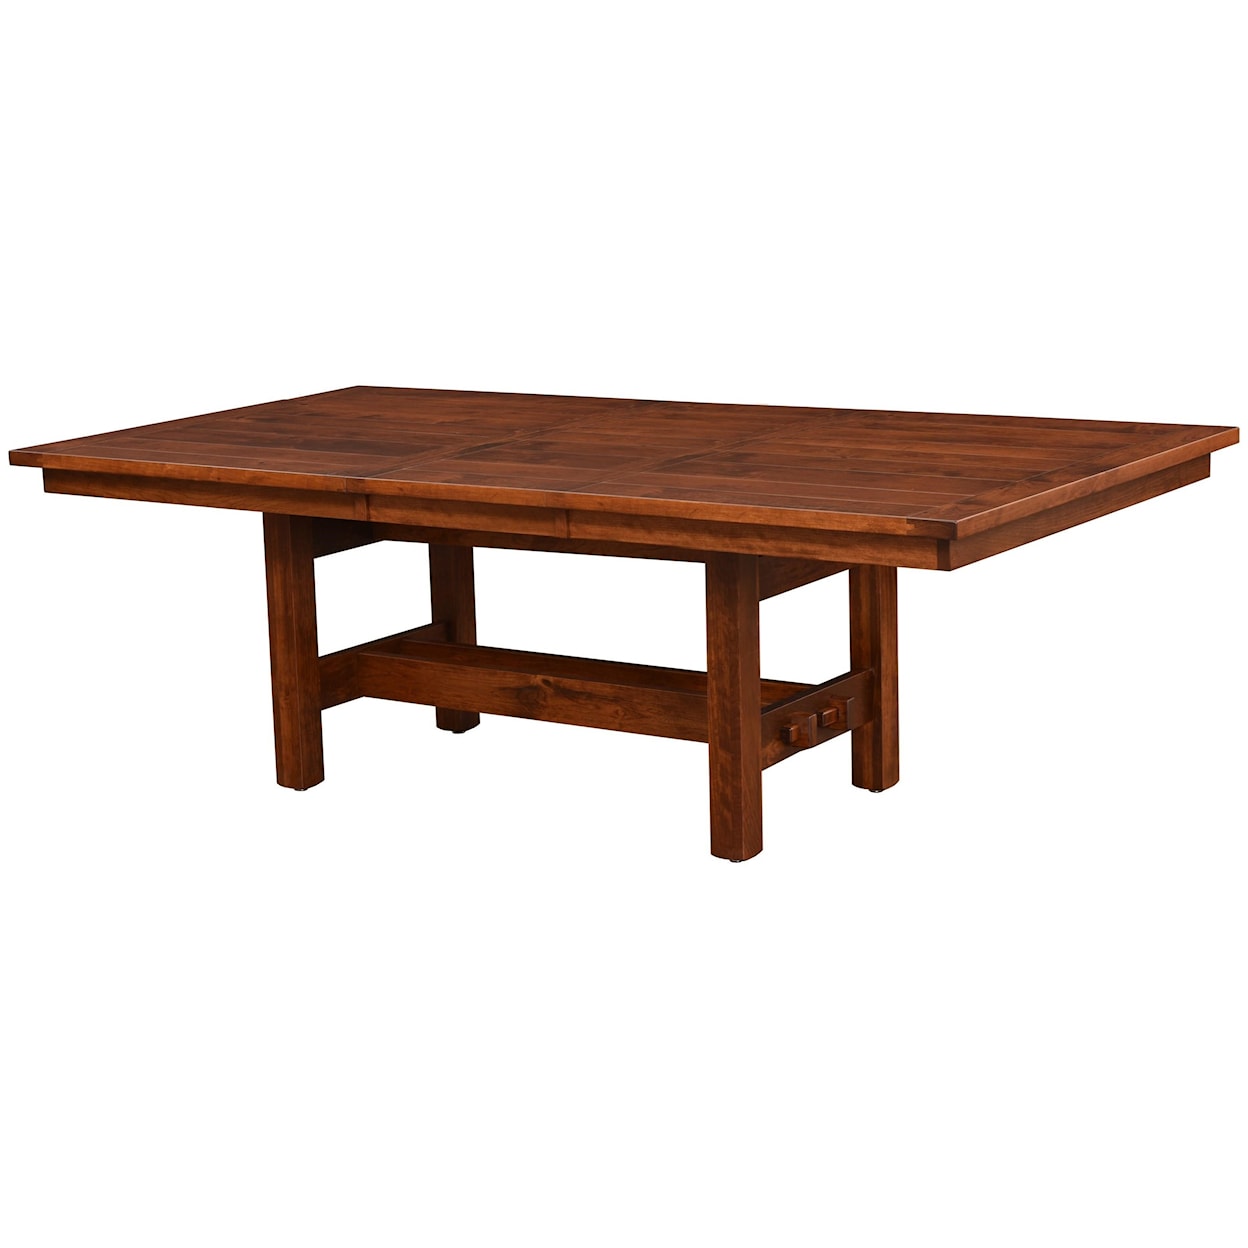 Trailway Amish Wood Sutter Mills 48 x 72" Dining Table